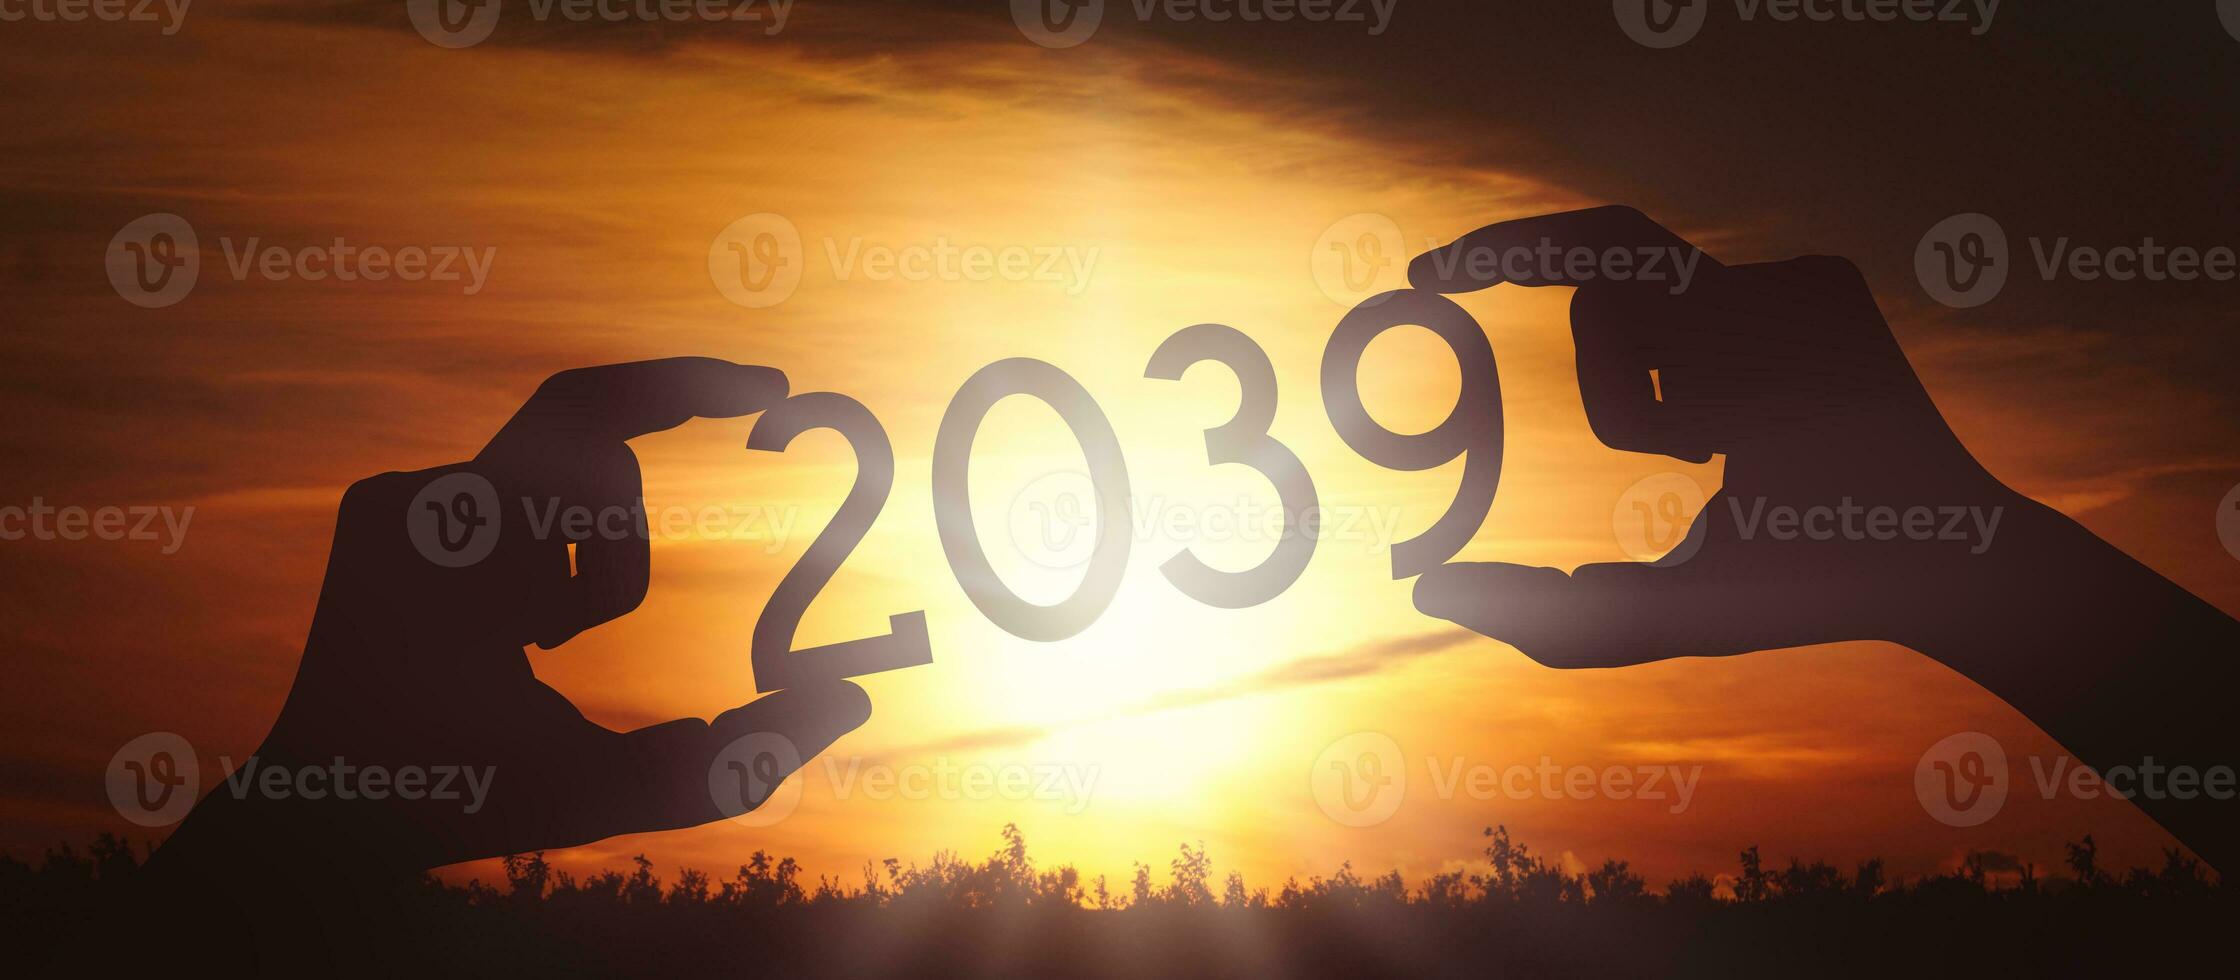 2039 - Human Hands Holding Black Silhouette Year Number photo